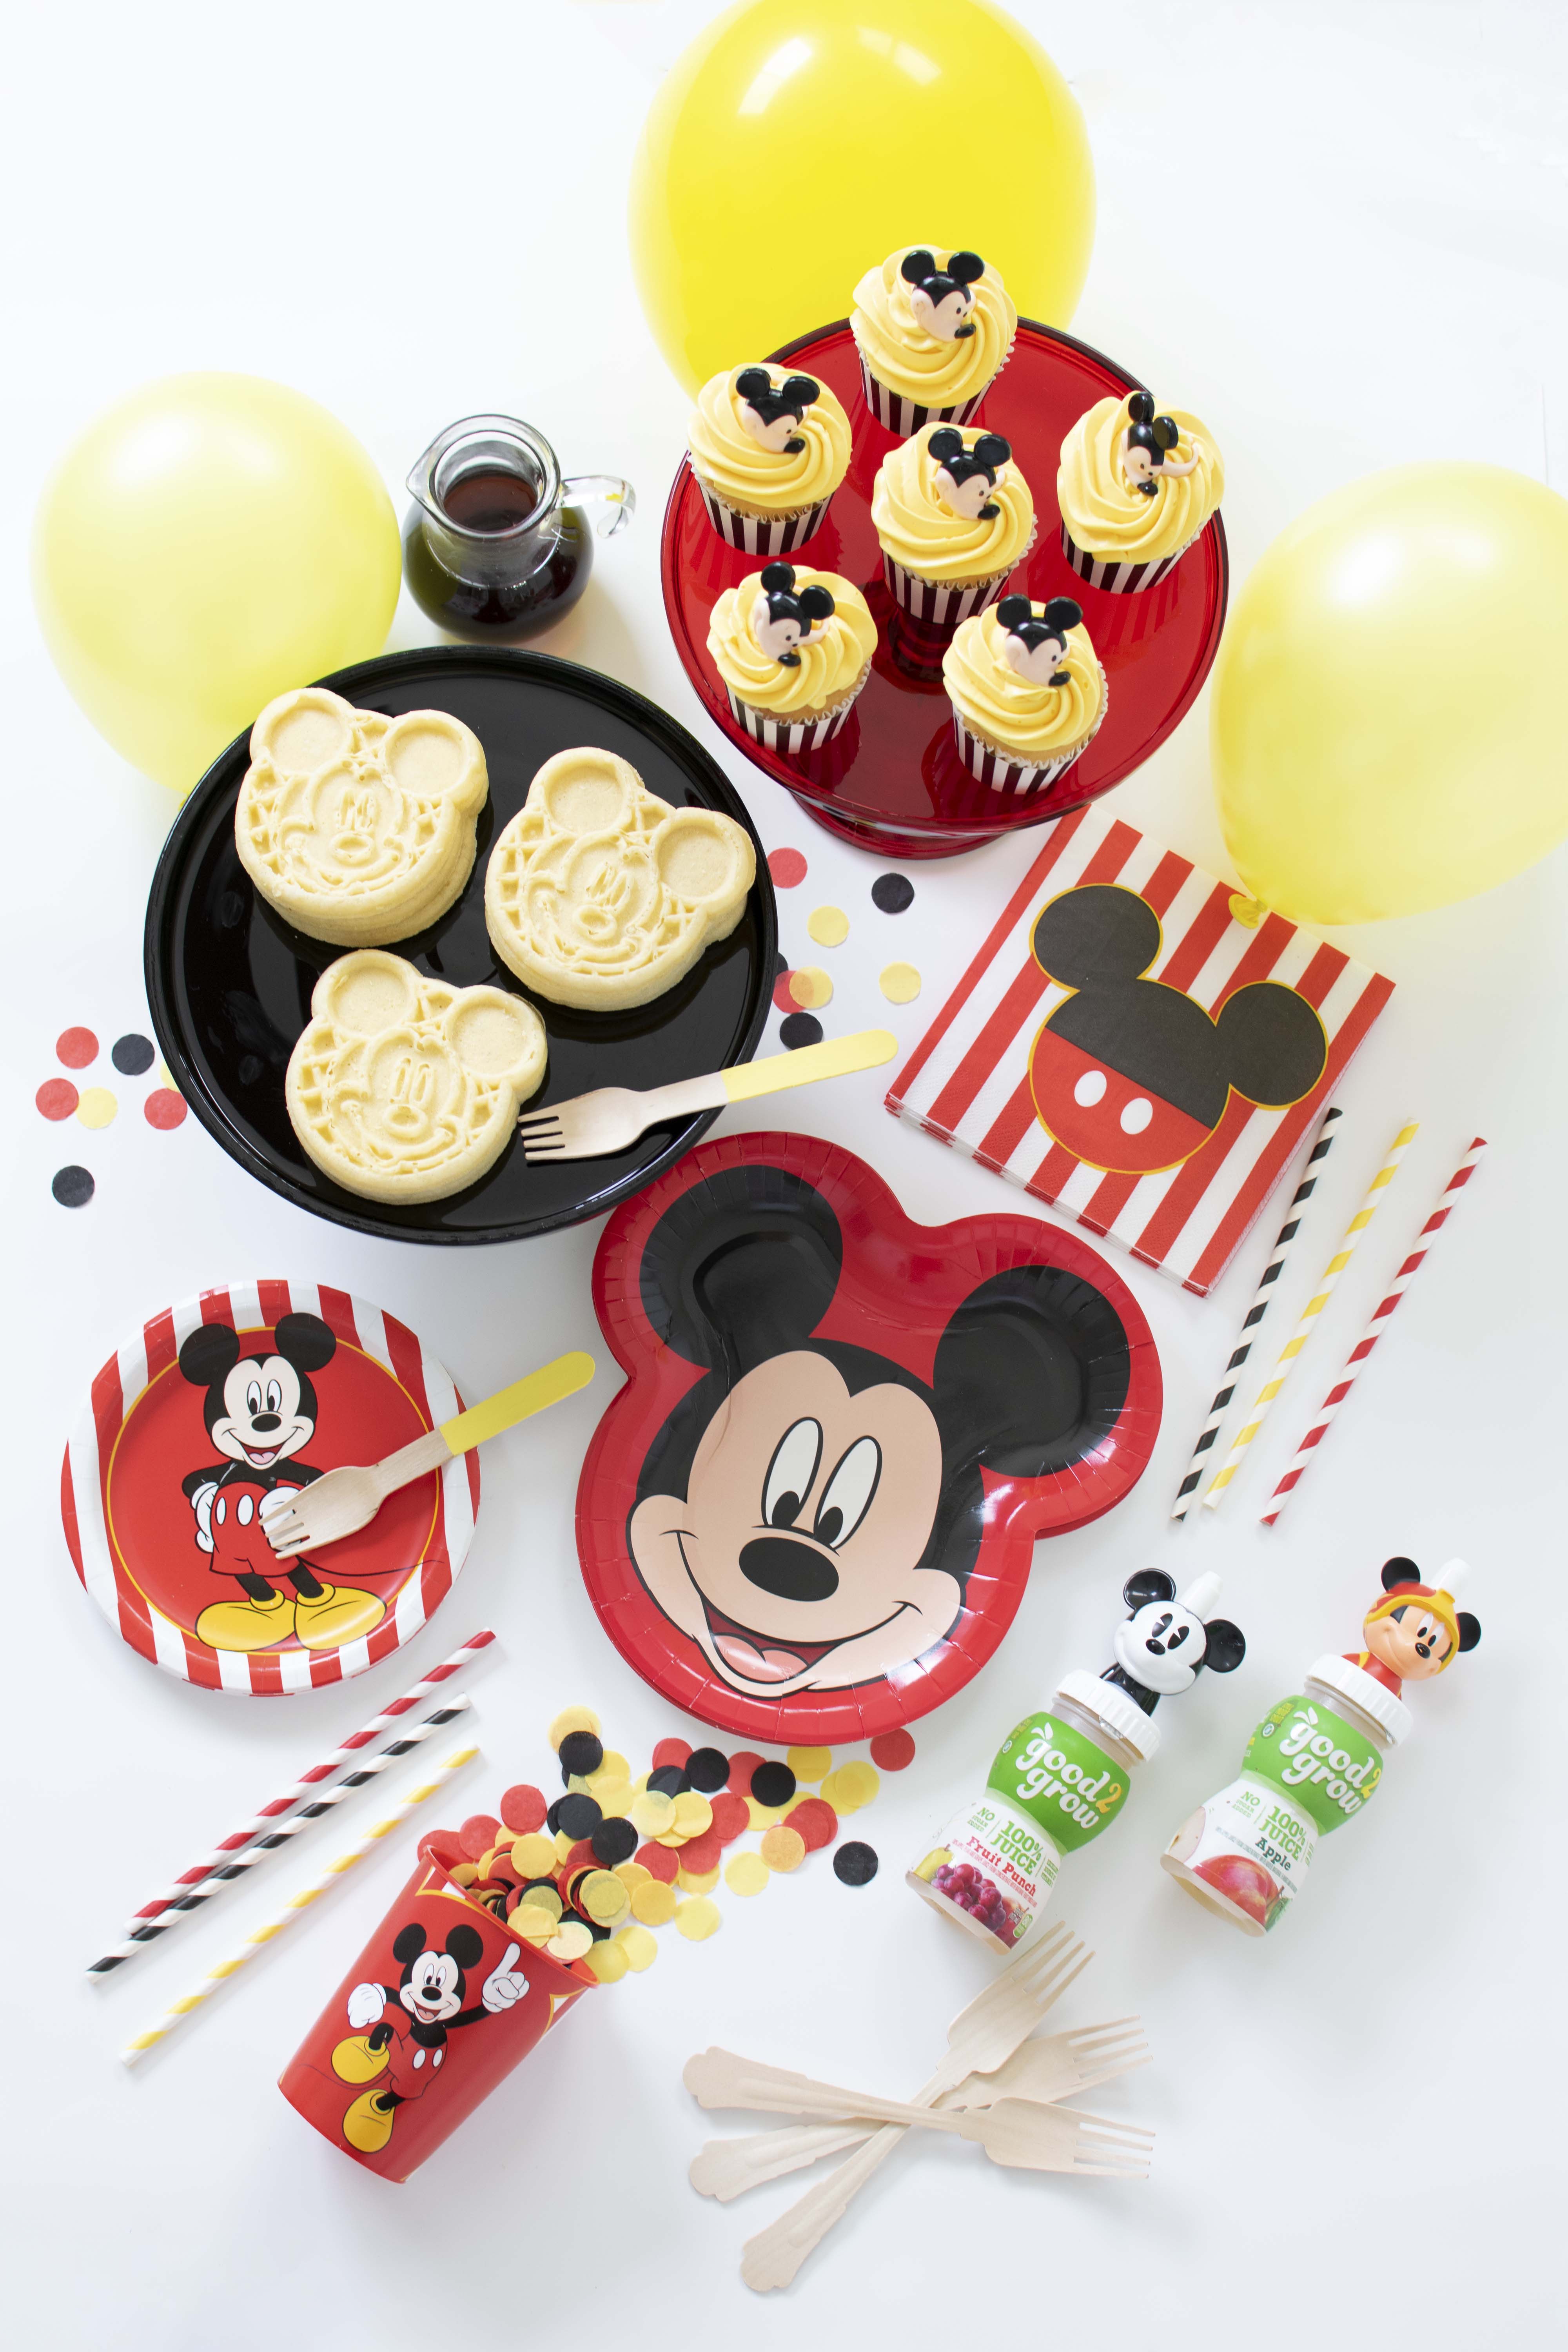 Happy 90th Birthday, Mickey! Mickey is turning 90 years old in November!!!